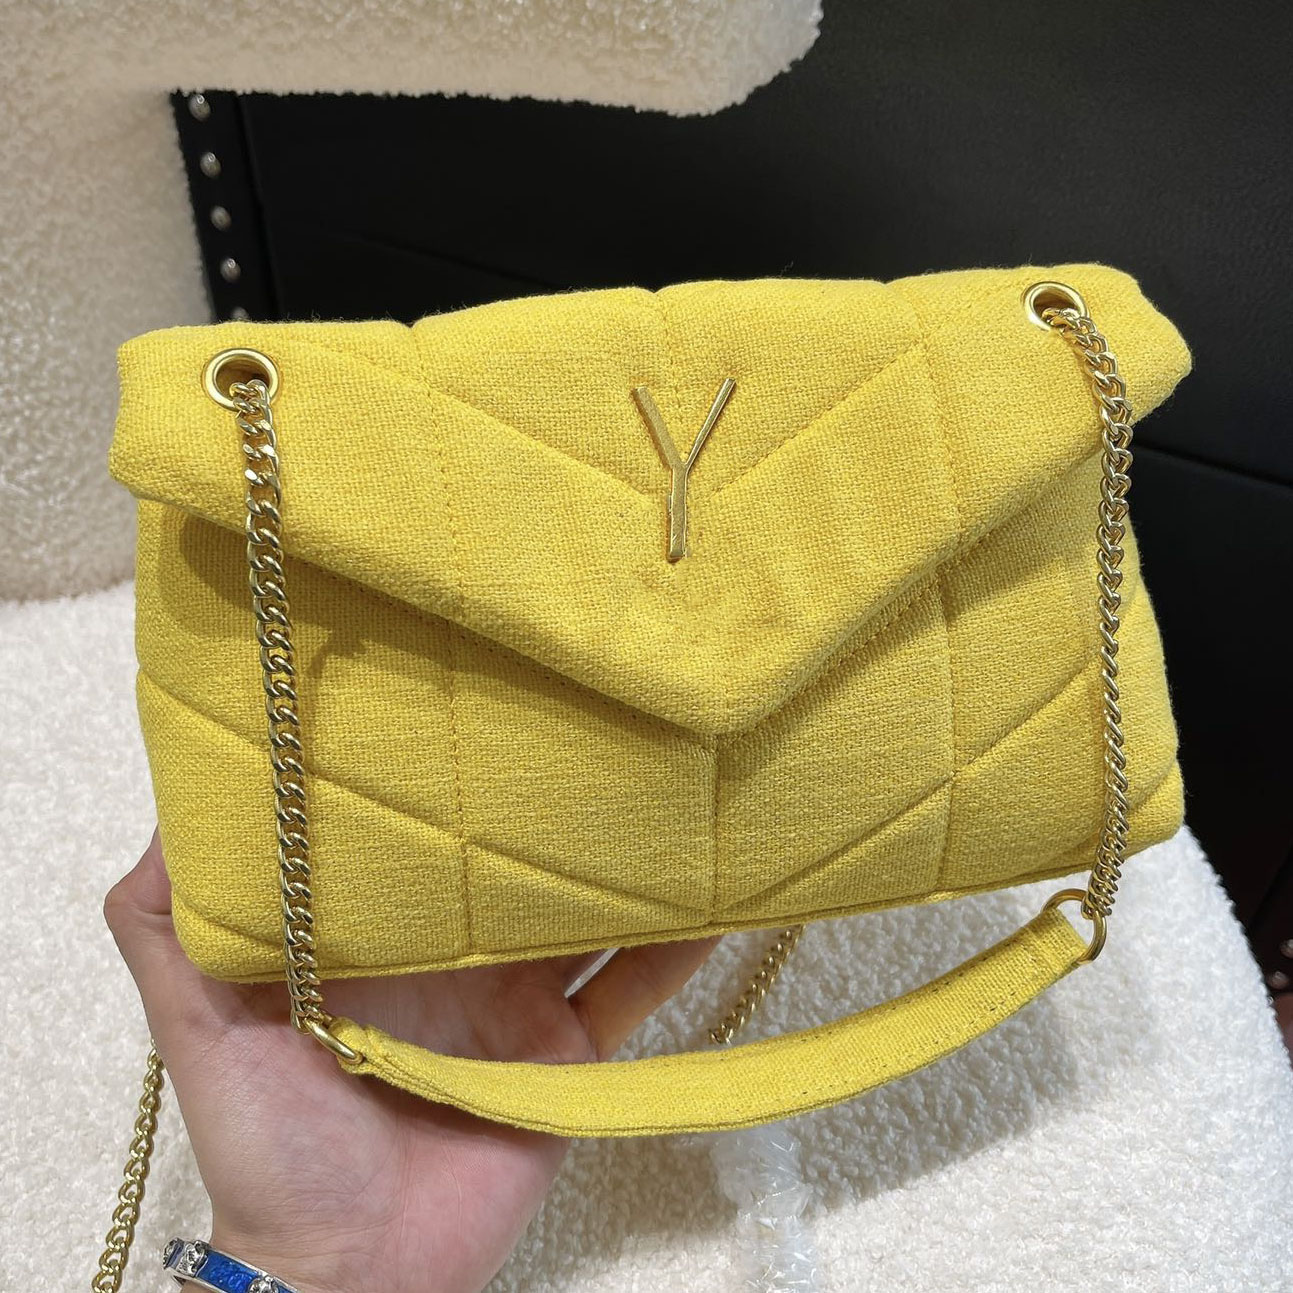 

22S Classic Flap Shoulder Bag Top Fabric Yellow Envelope Diamond Check Quilted Chain Metal Letter Embellished Crossbody Bag French Luxury Designer Ladies Handbags